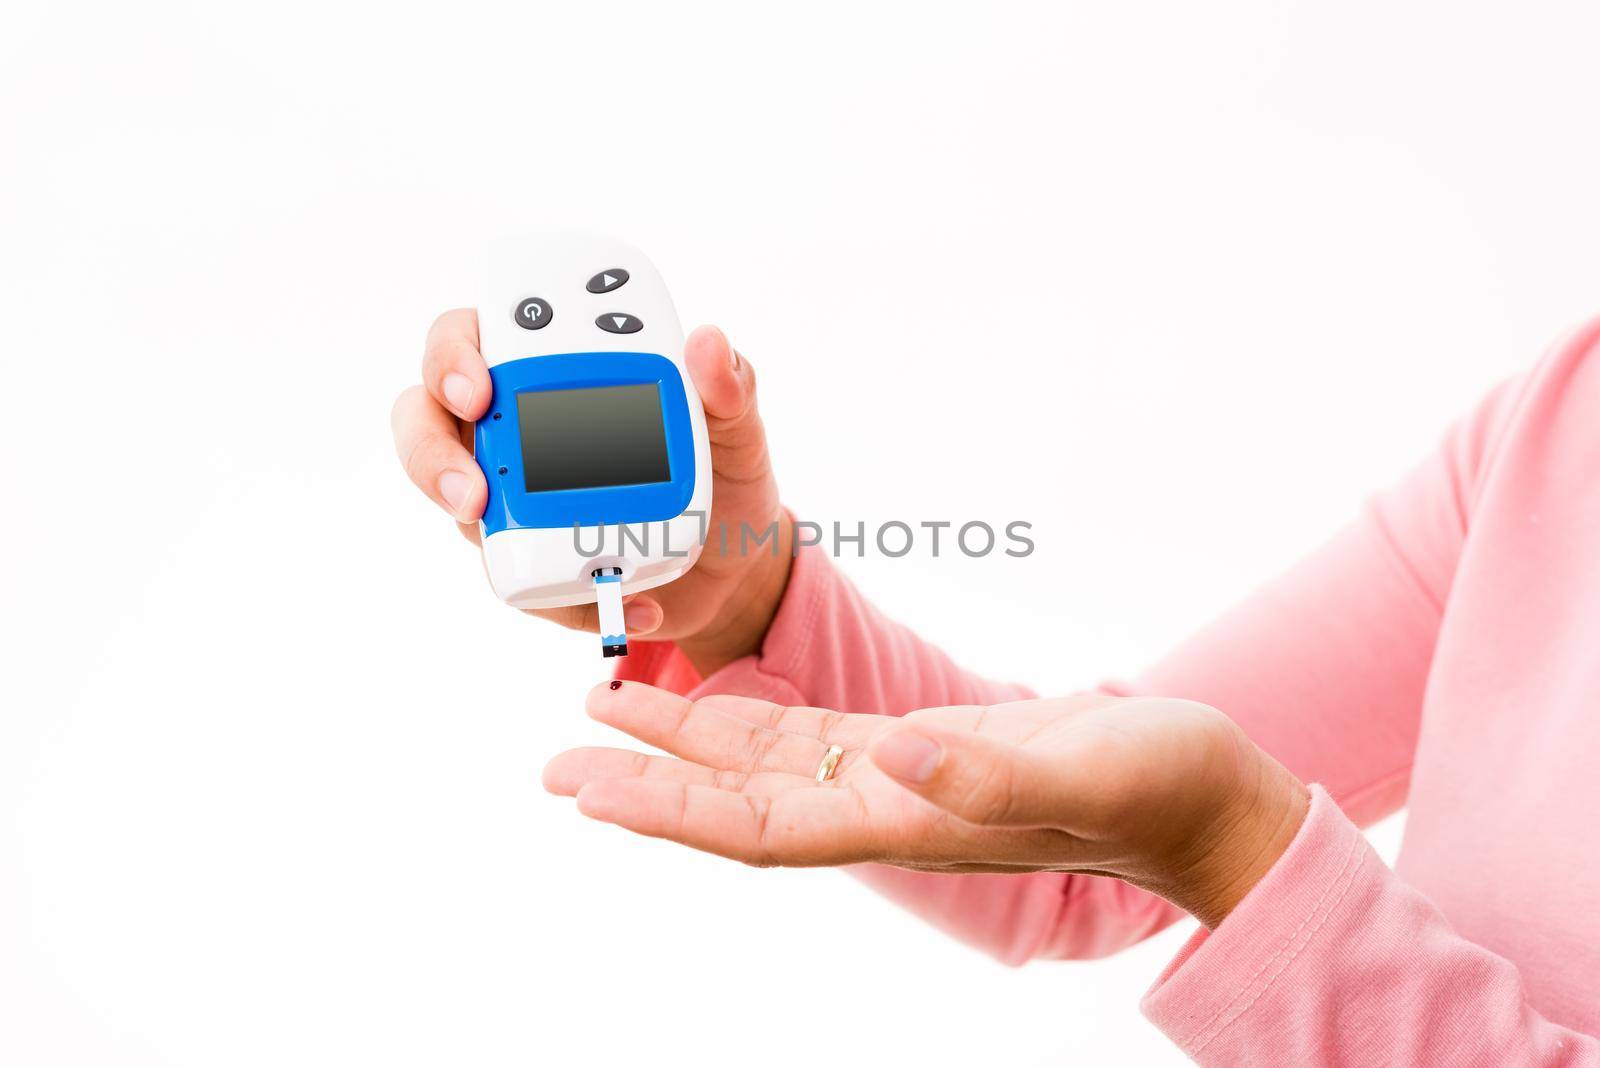 Hands woman measuring glucose test level check with blood on finger by glucometer she monitor and control high blood sugar diabetes and glycemic health care concept isolated on white background